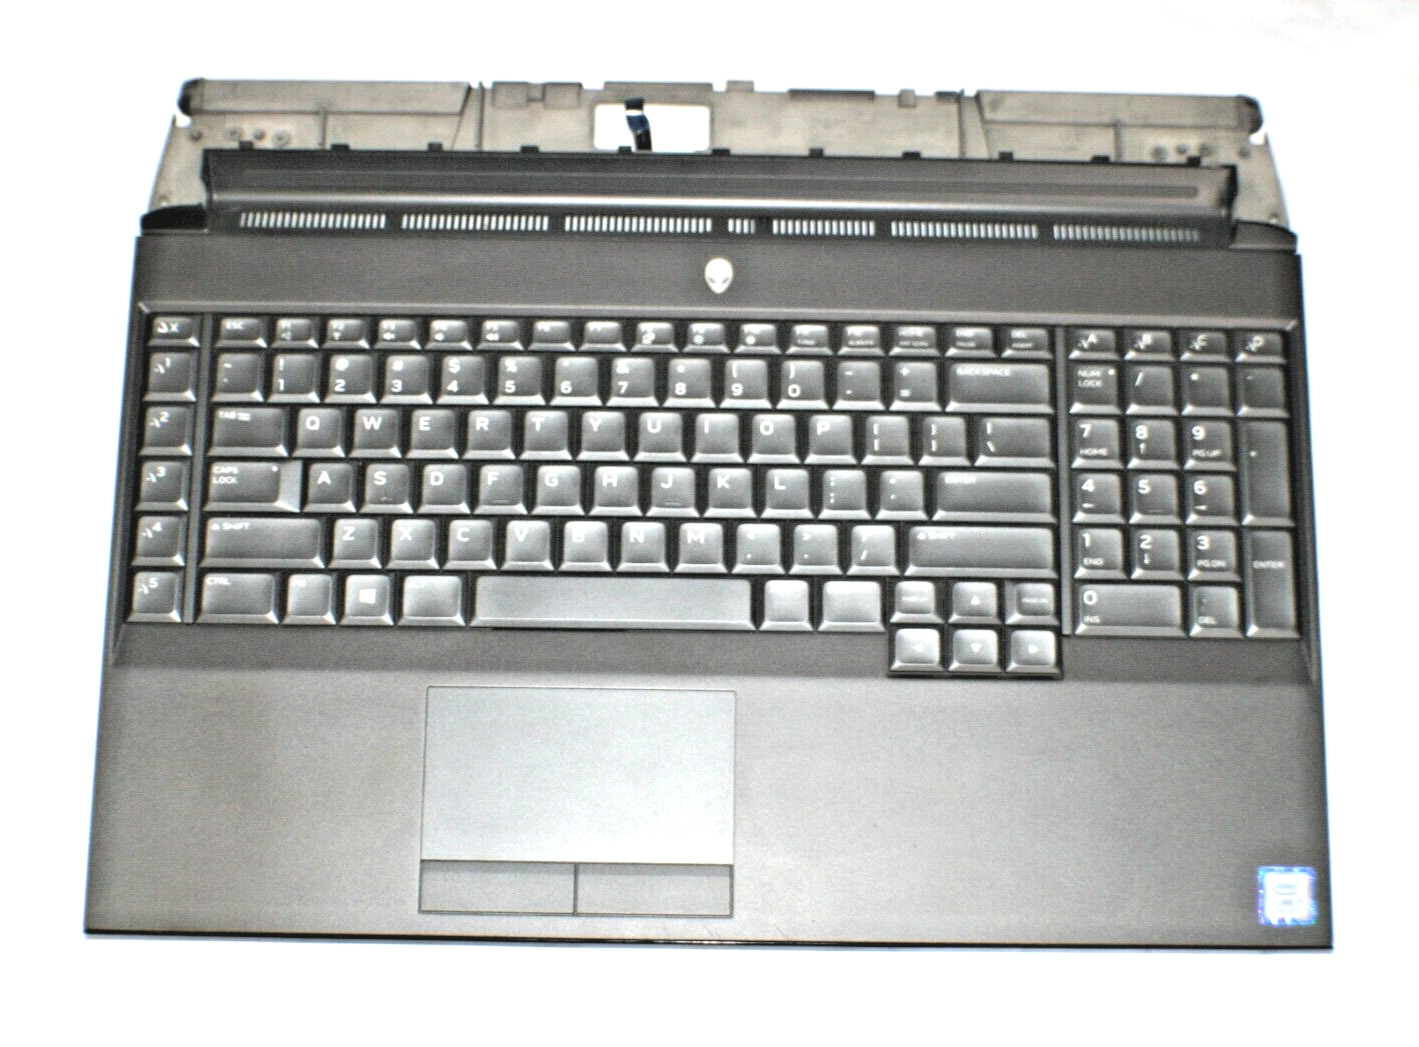 ORIGINAL ALIENWARE AREA 51M PALMREST 036Y0 AM2F1000701 WITH KEYBOARD TOUCHPAD